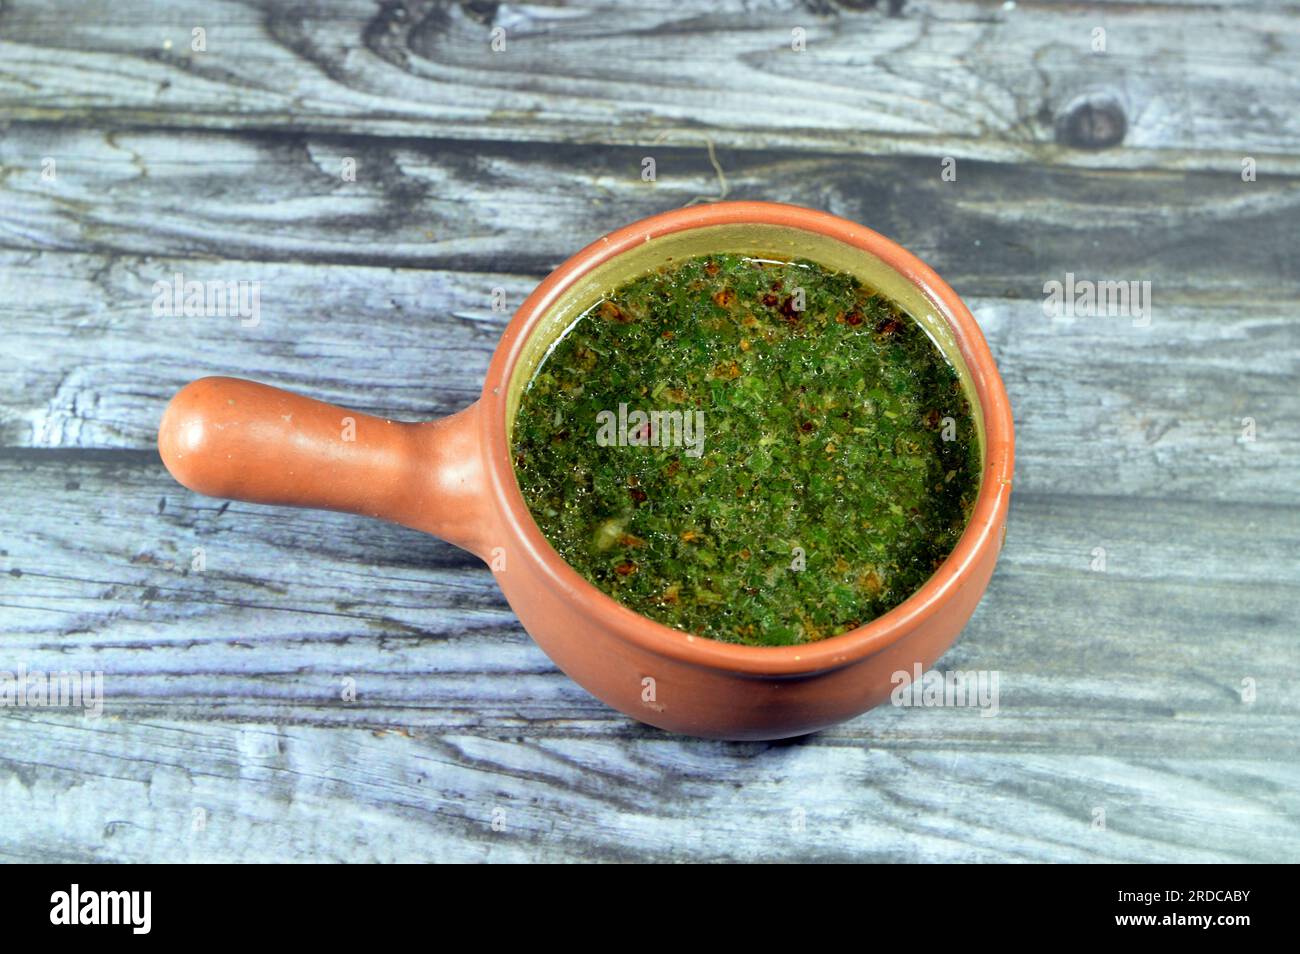 Mulukhiyah, also known as molokhia, molohiya or ewedu, a dish made from the leaves of Corchorus olitorius, commonly known in English as denje'c'jute, Stock Photo